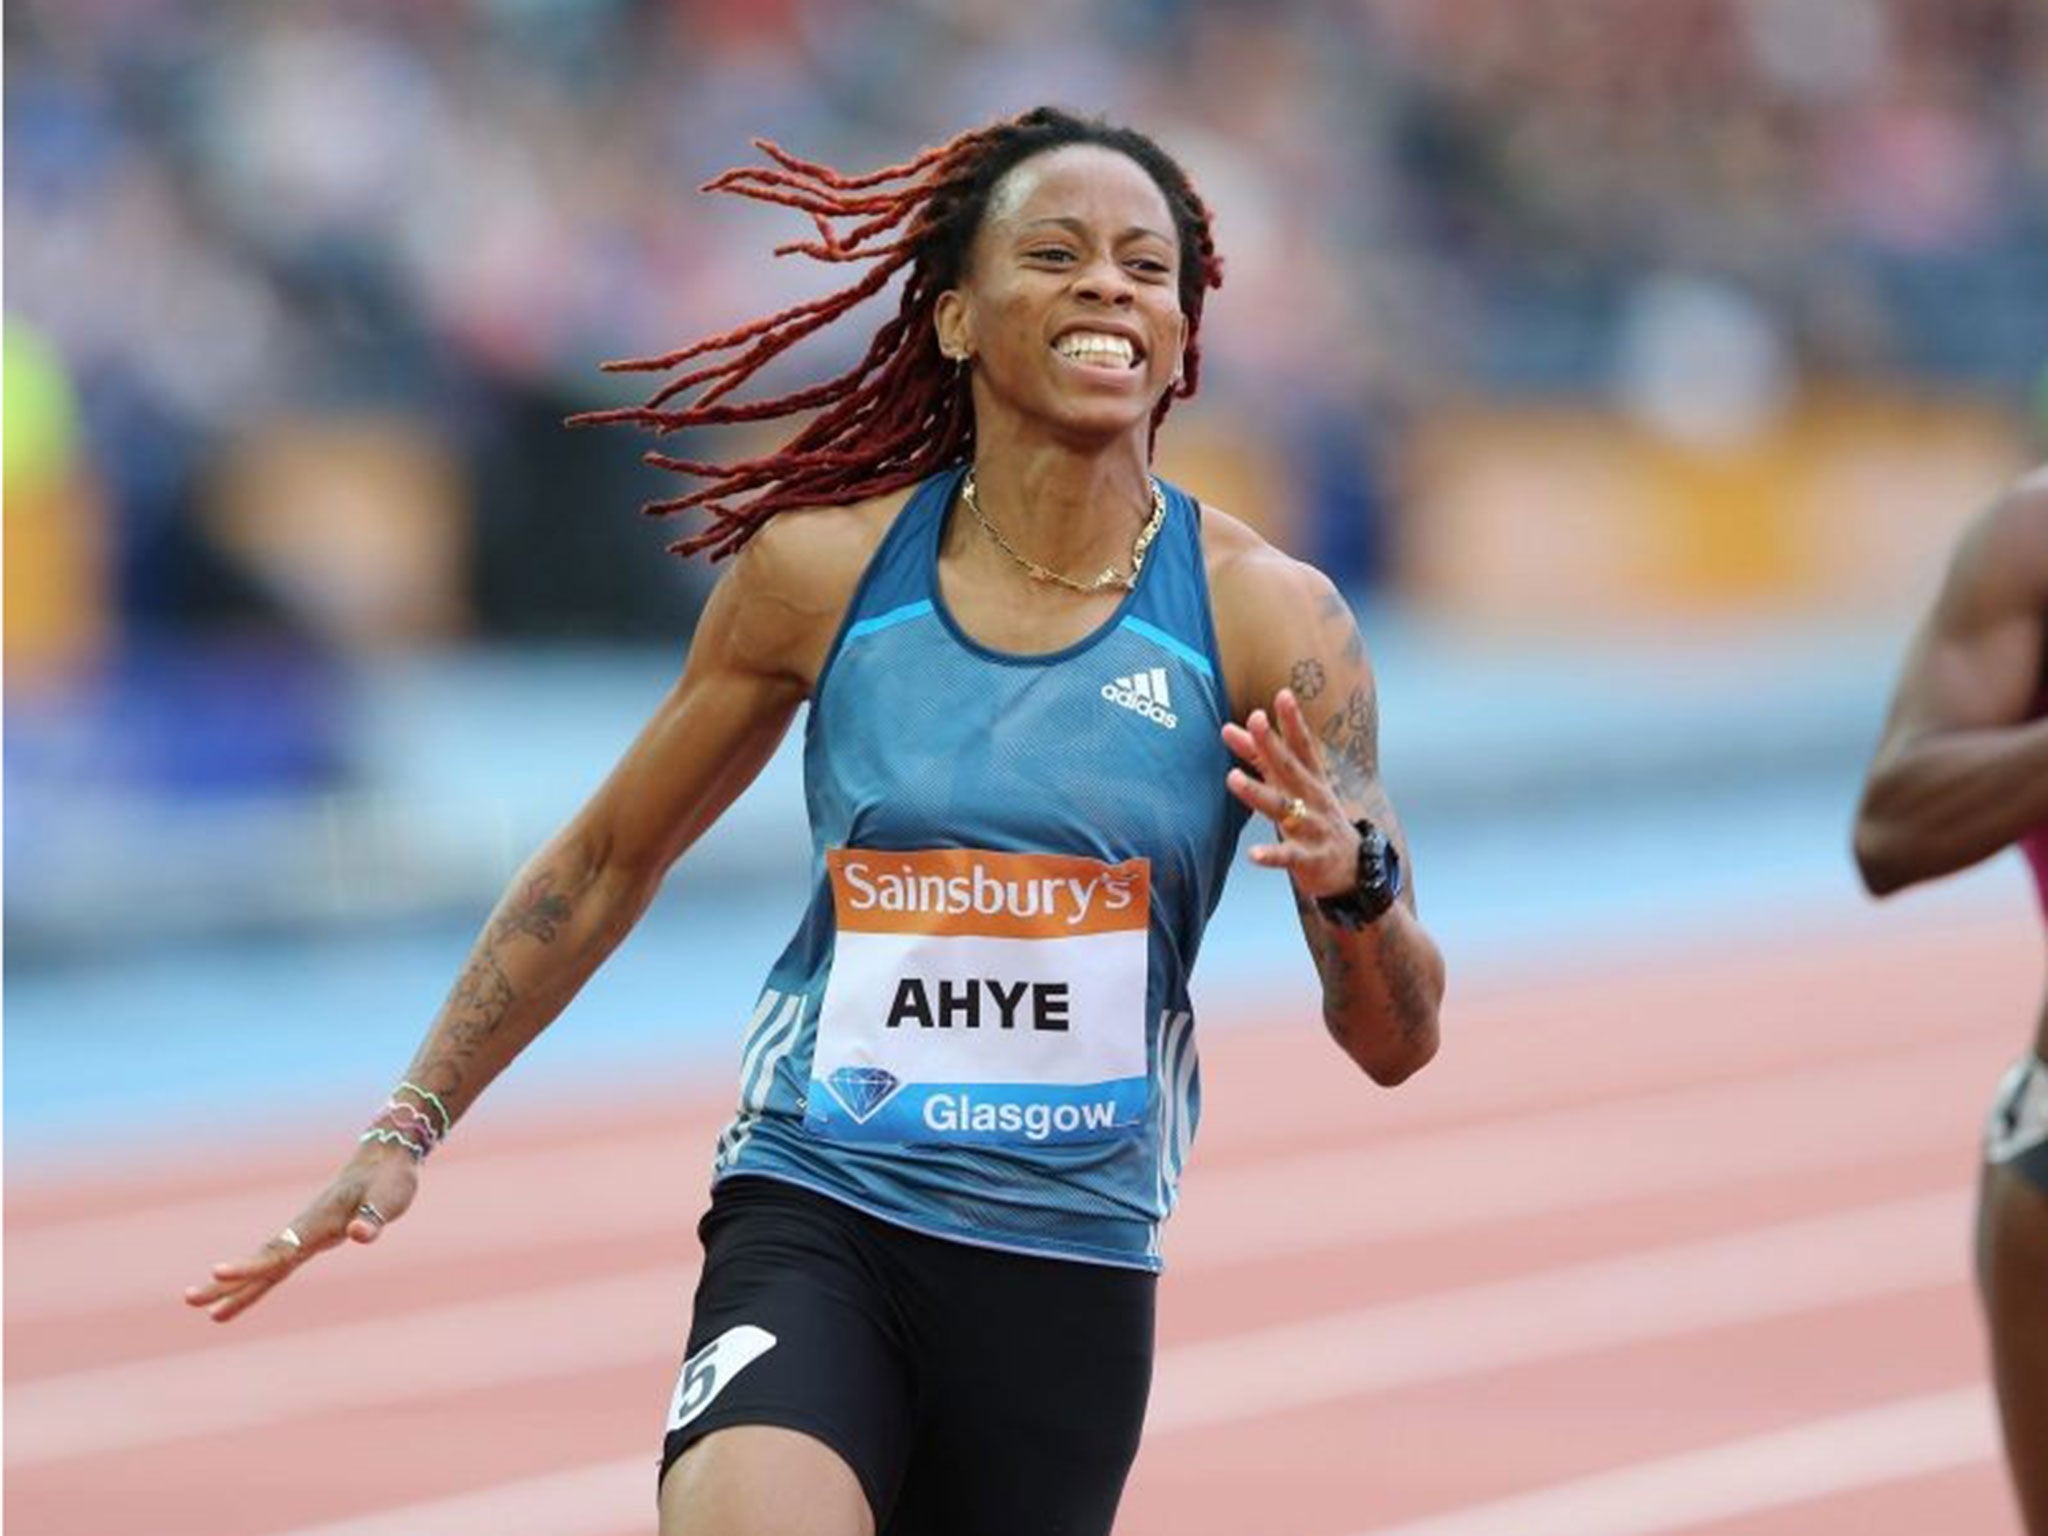 Ahye wins a women's 100m race at the IAAF Diamond League meeting at Hampden Park in Glasgow earlier this month